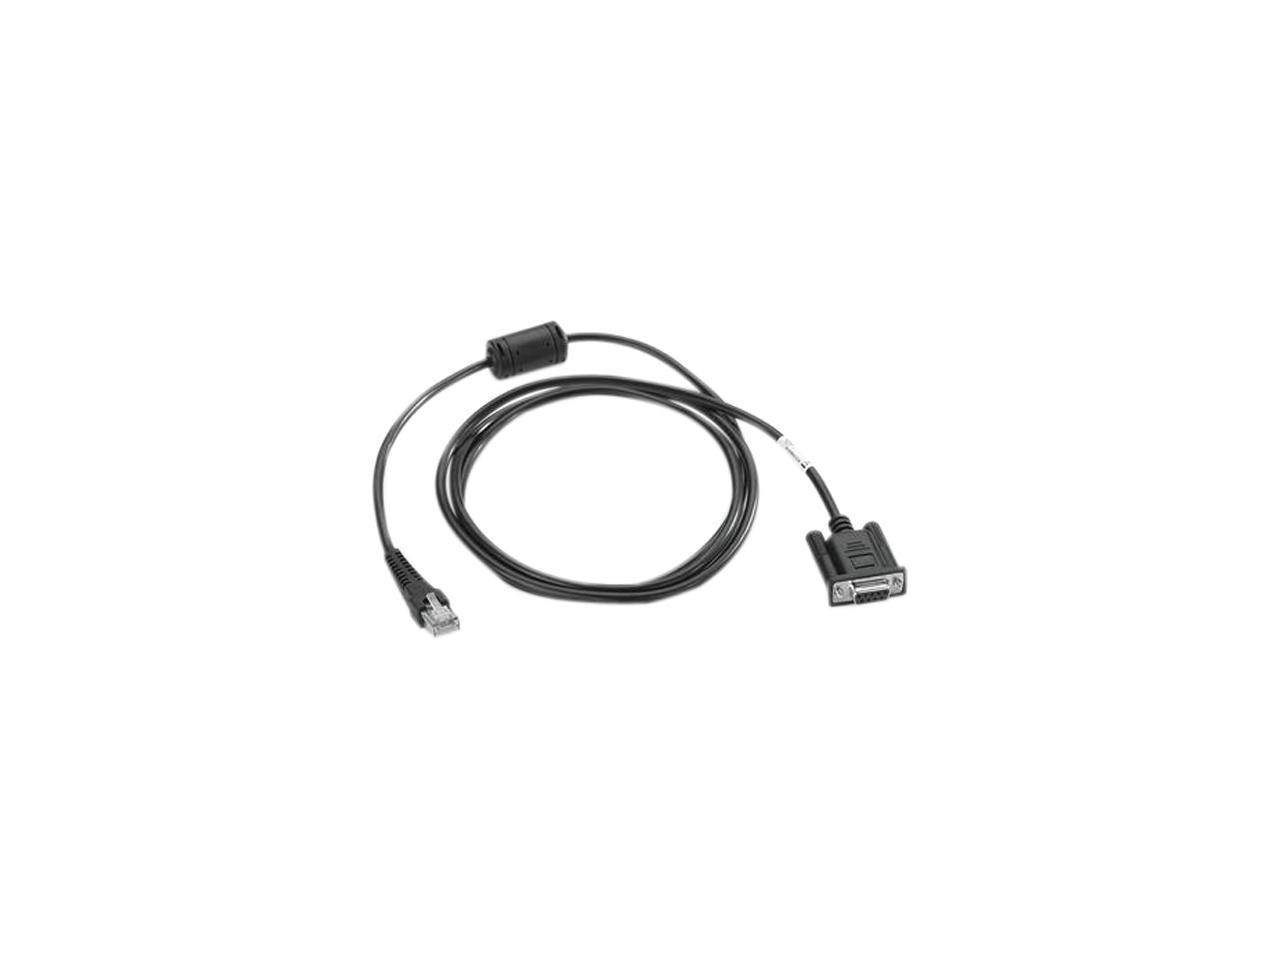 Motorola RS-232 Cable For Cradle To The Host System